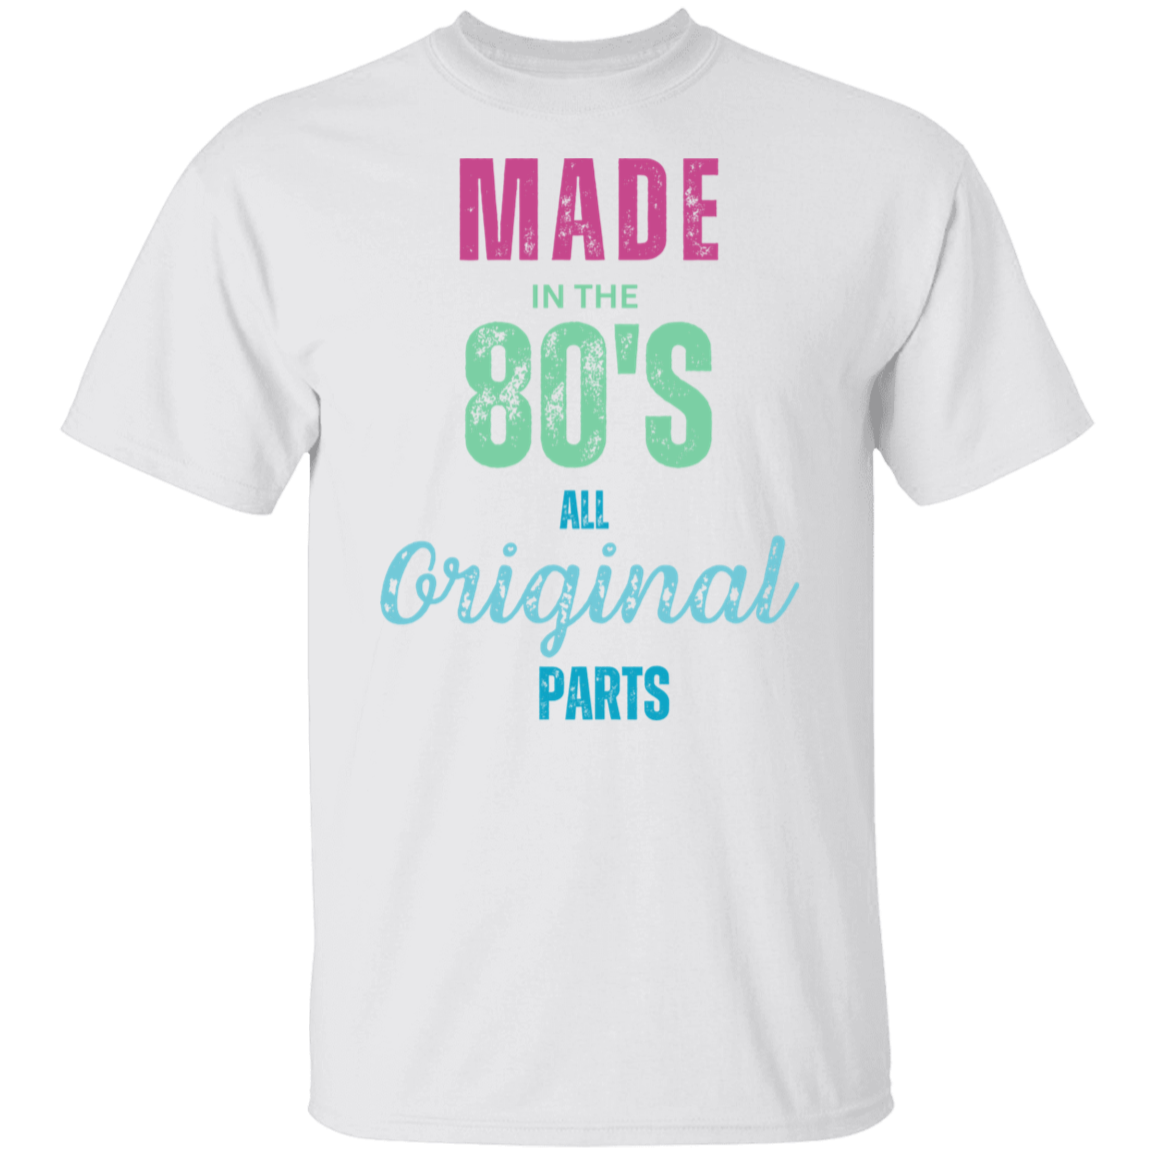 MADE IN THE 80'S 5.3 oz. T-Shirt